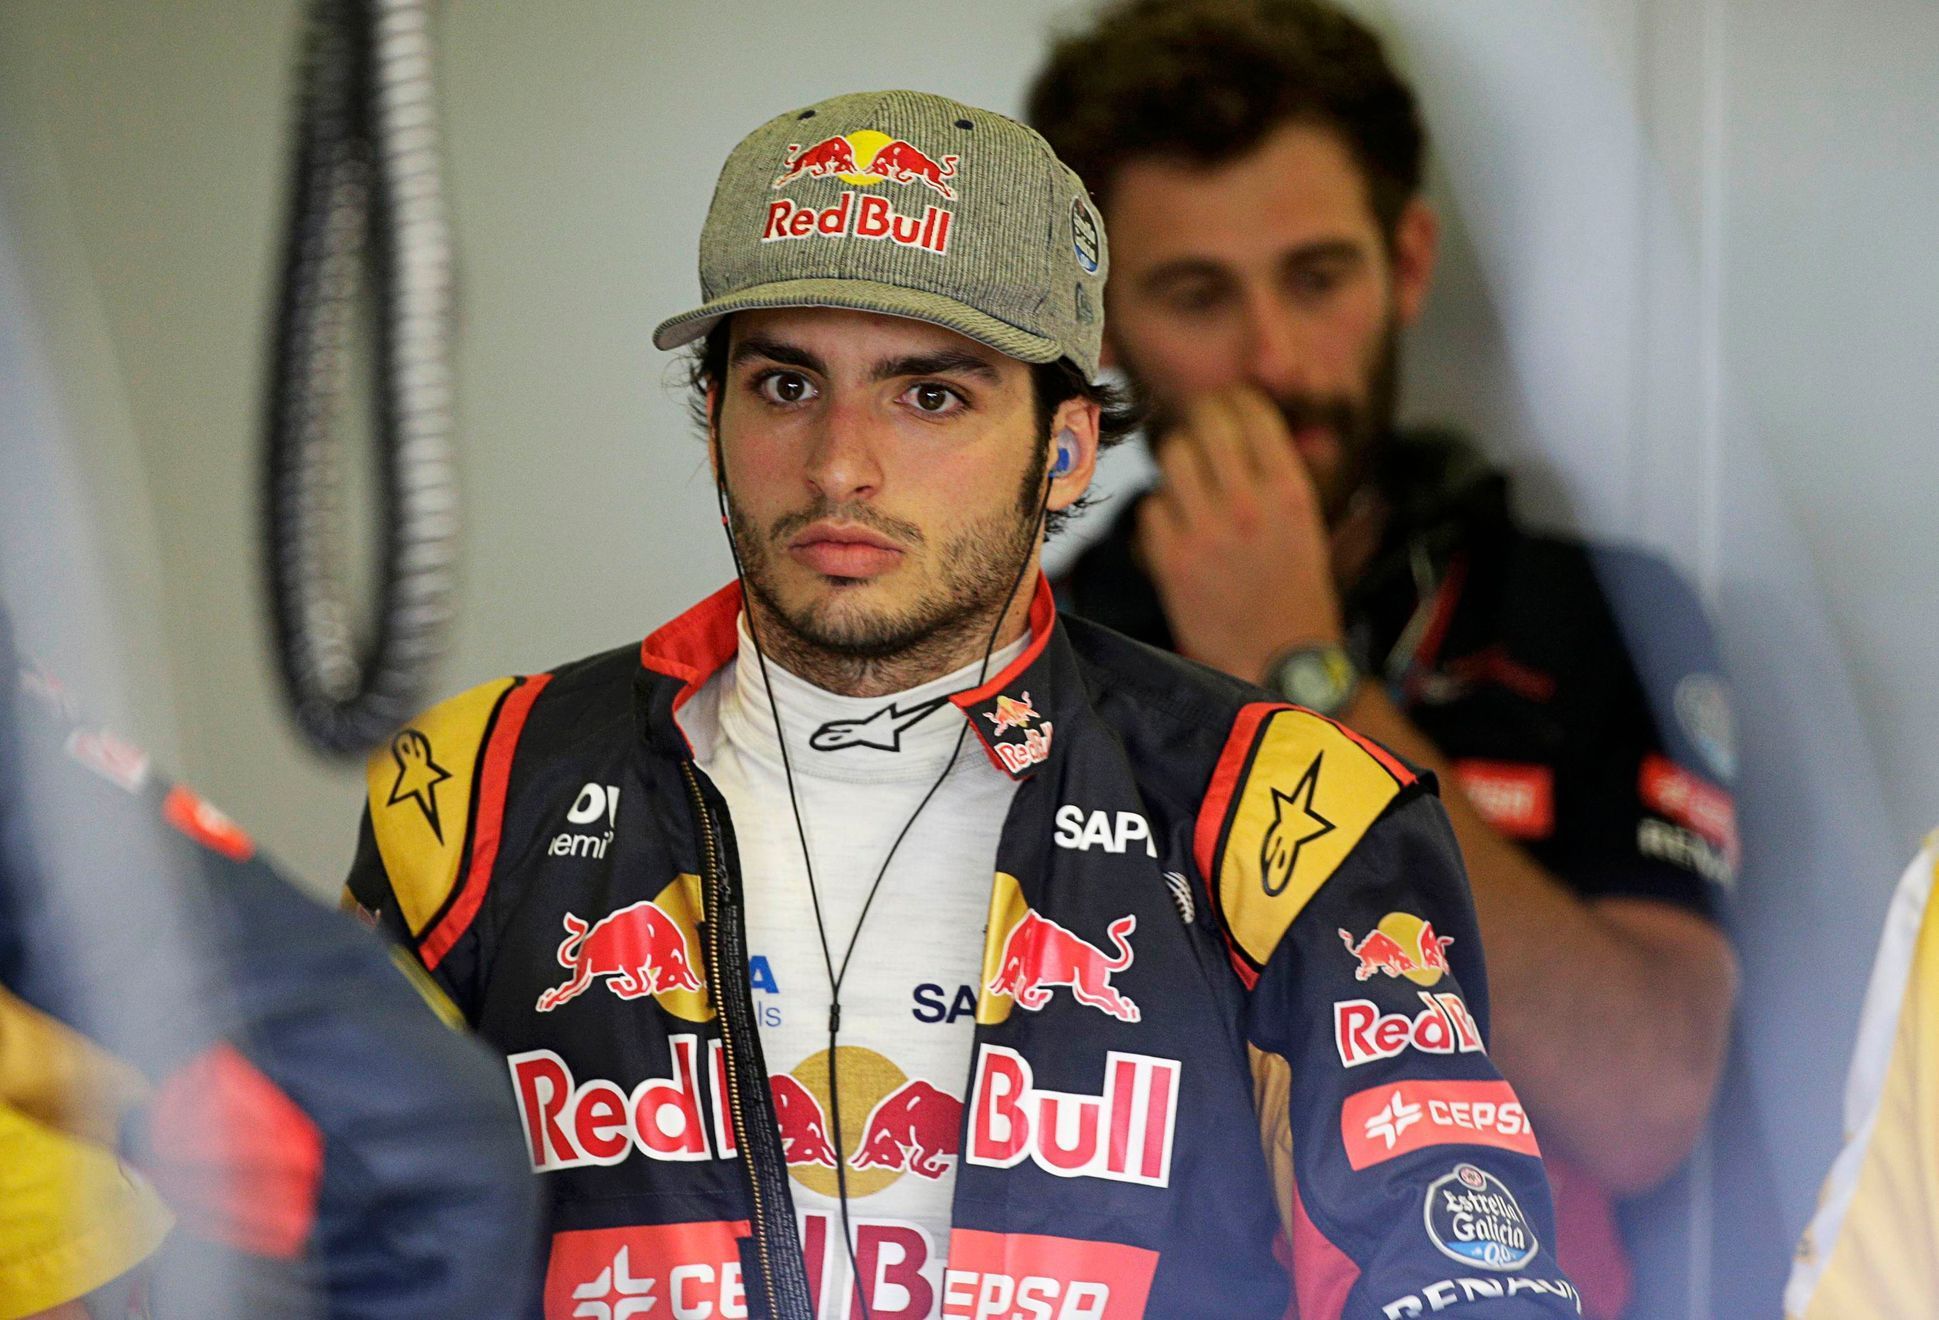 Toro Rosso Formula One driver Carlos Sainz of Spain walks in the team garage during the third practice session of the Australian F1 Grand Prix at the Albert Park circuit in Melbourne